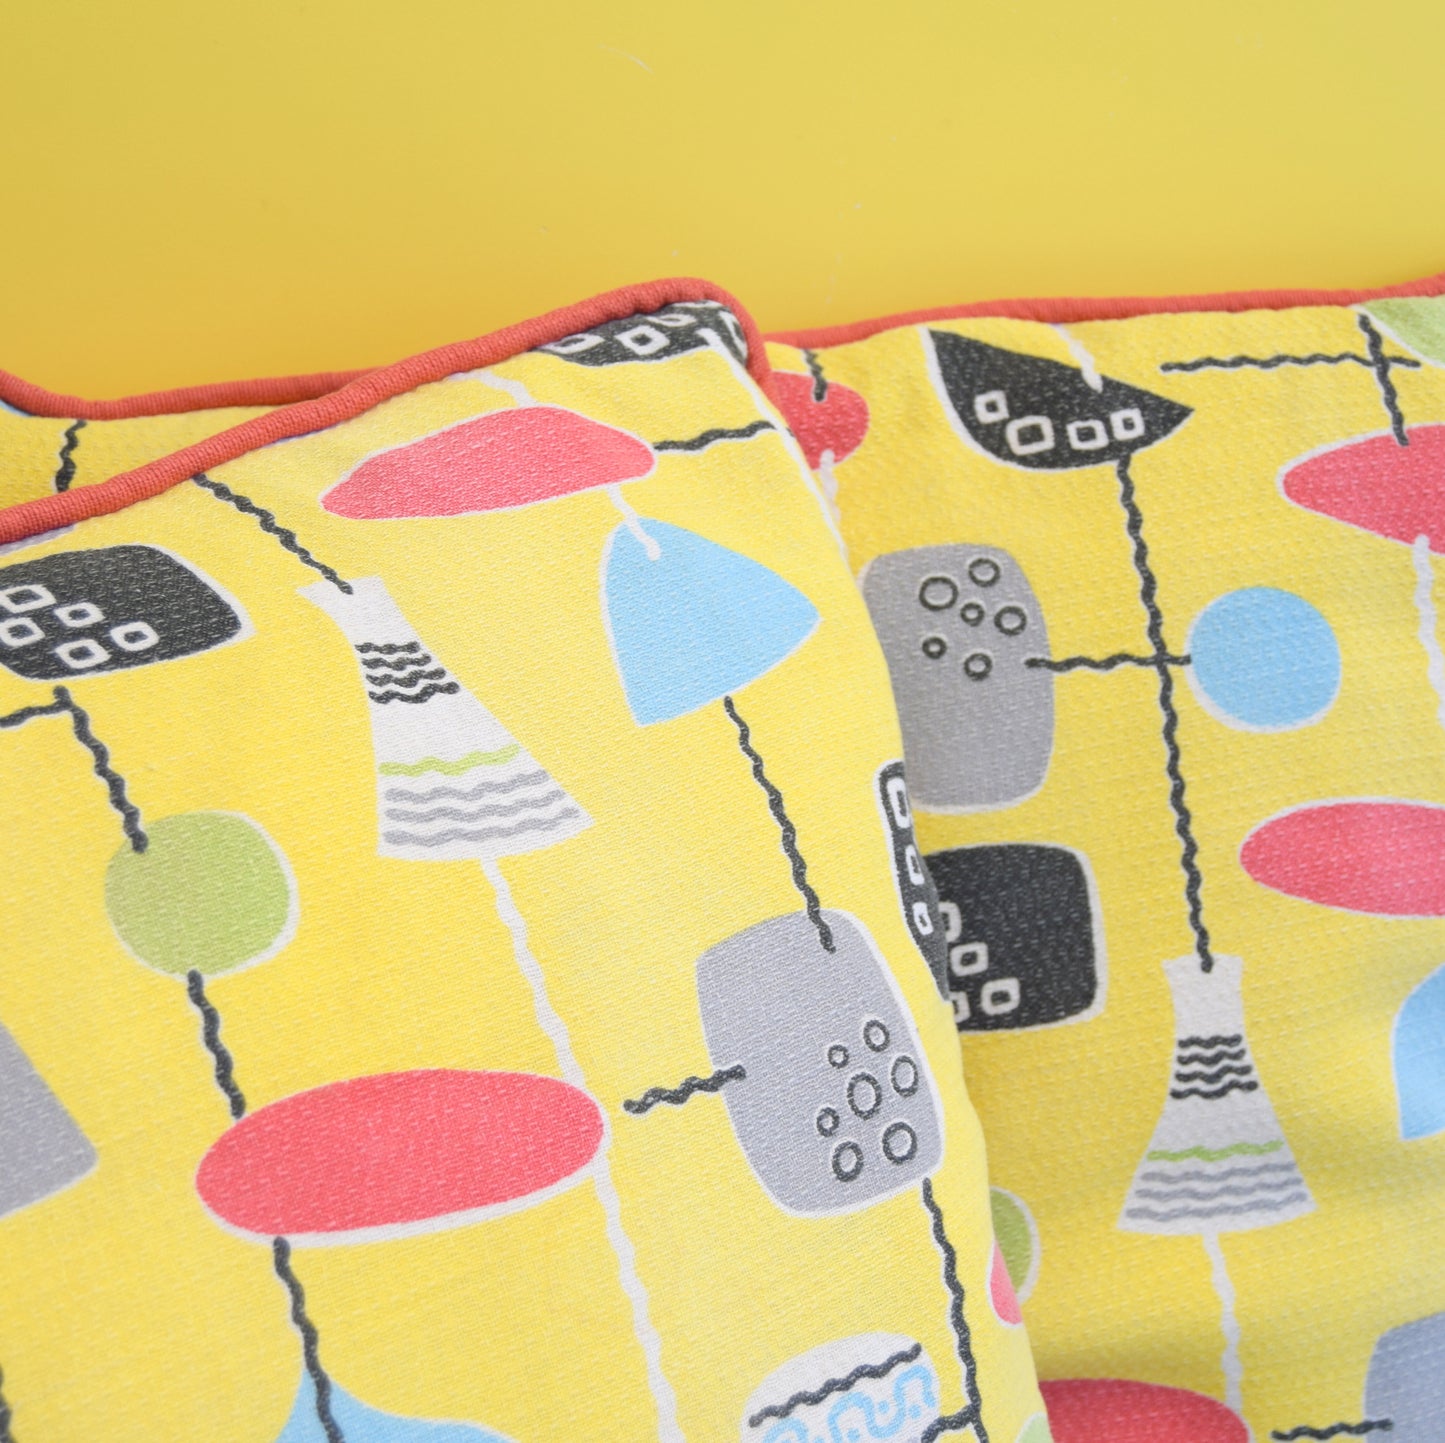 Vintage 1950s Cushions - Classic Print - Lamps Fabric - Yellow